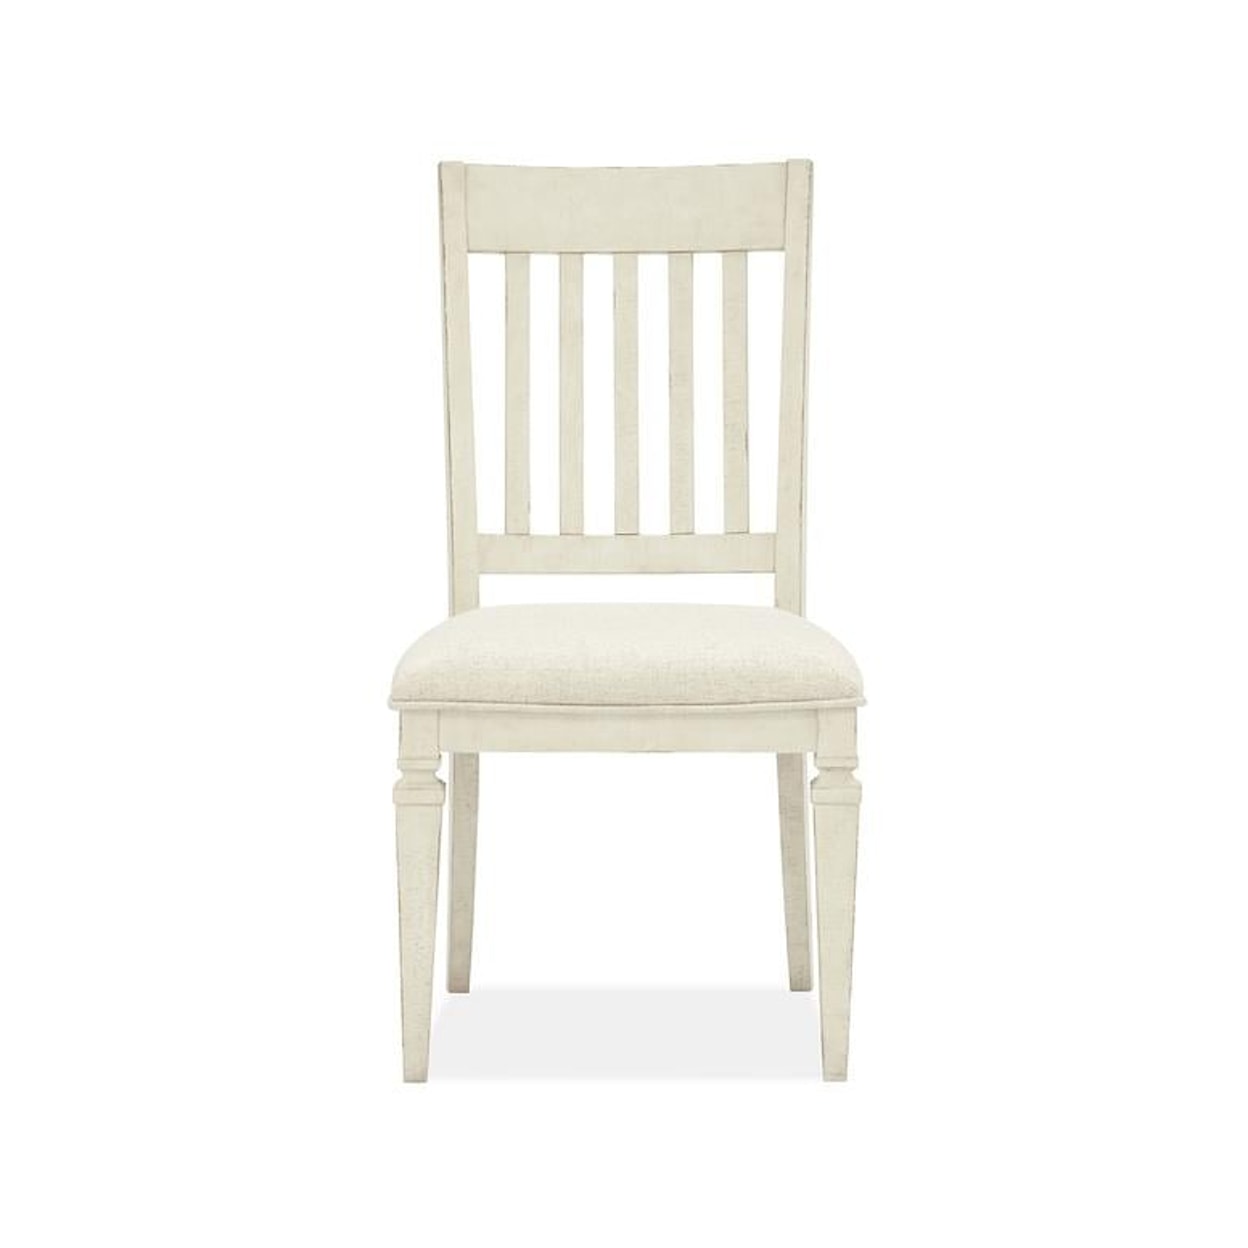 Magnussen Home Newport Dining Upholstered Dining Side Chair